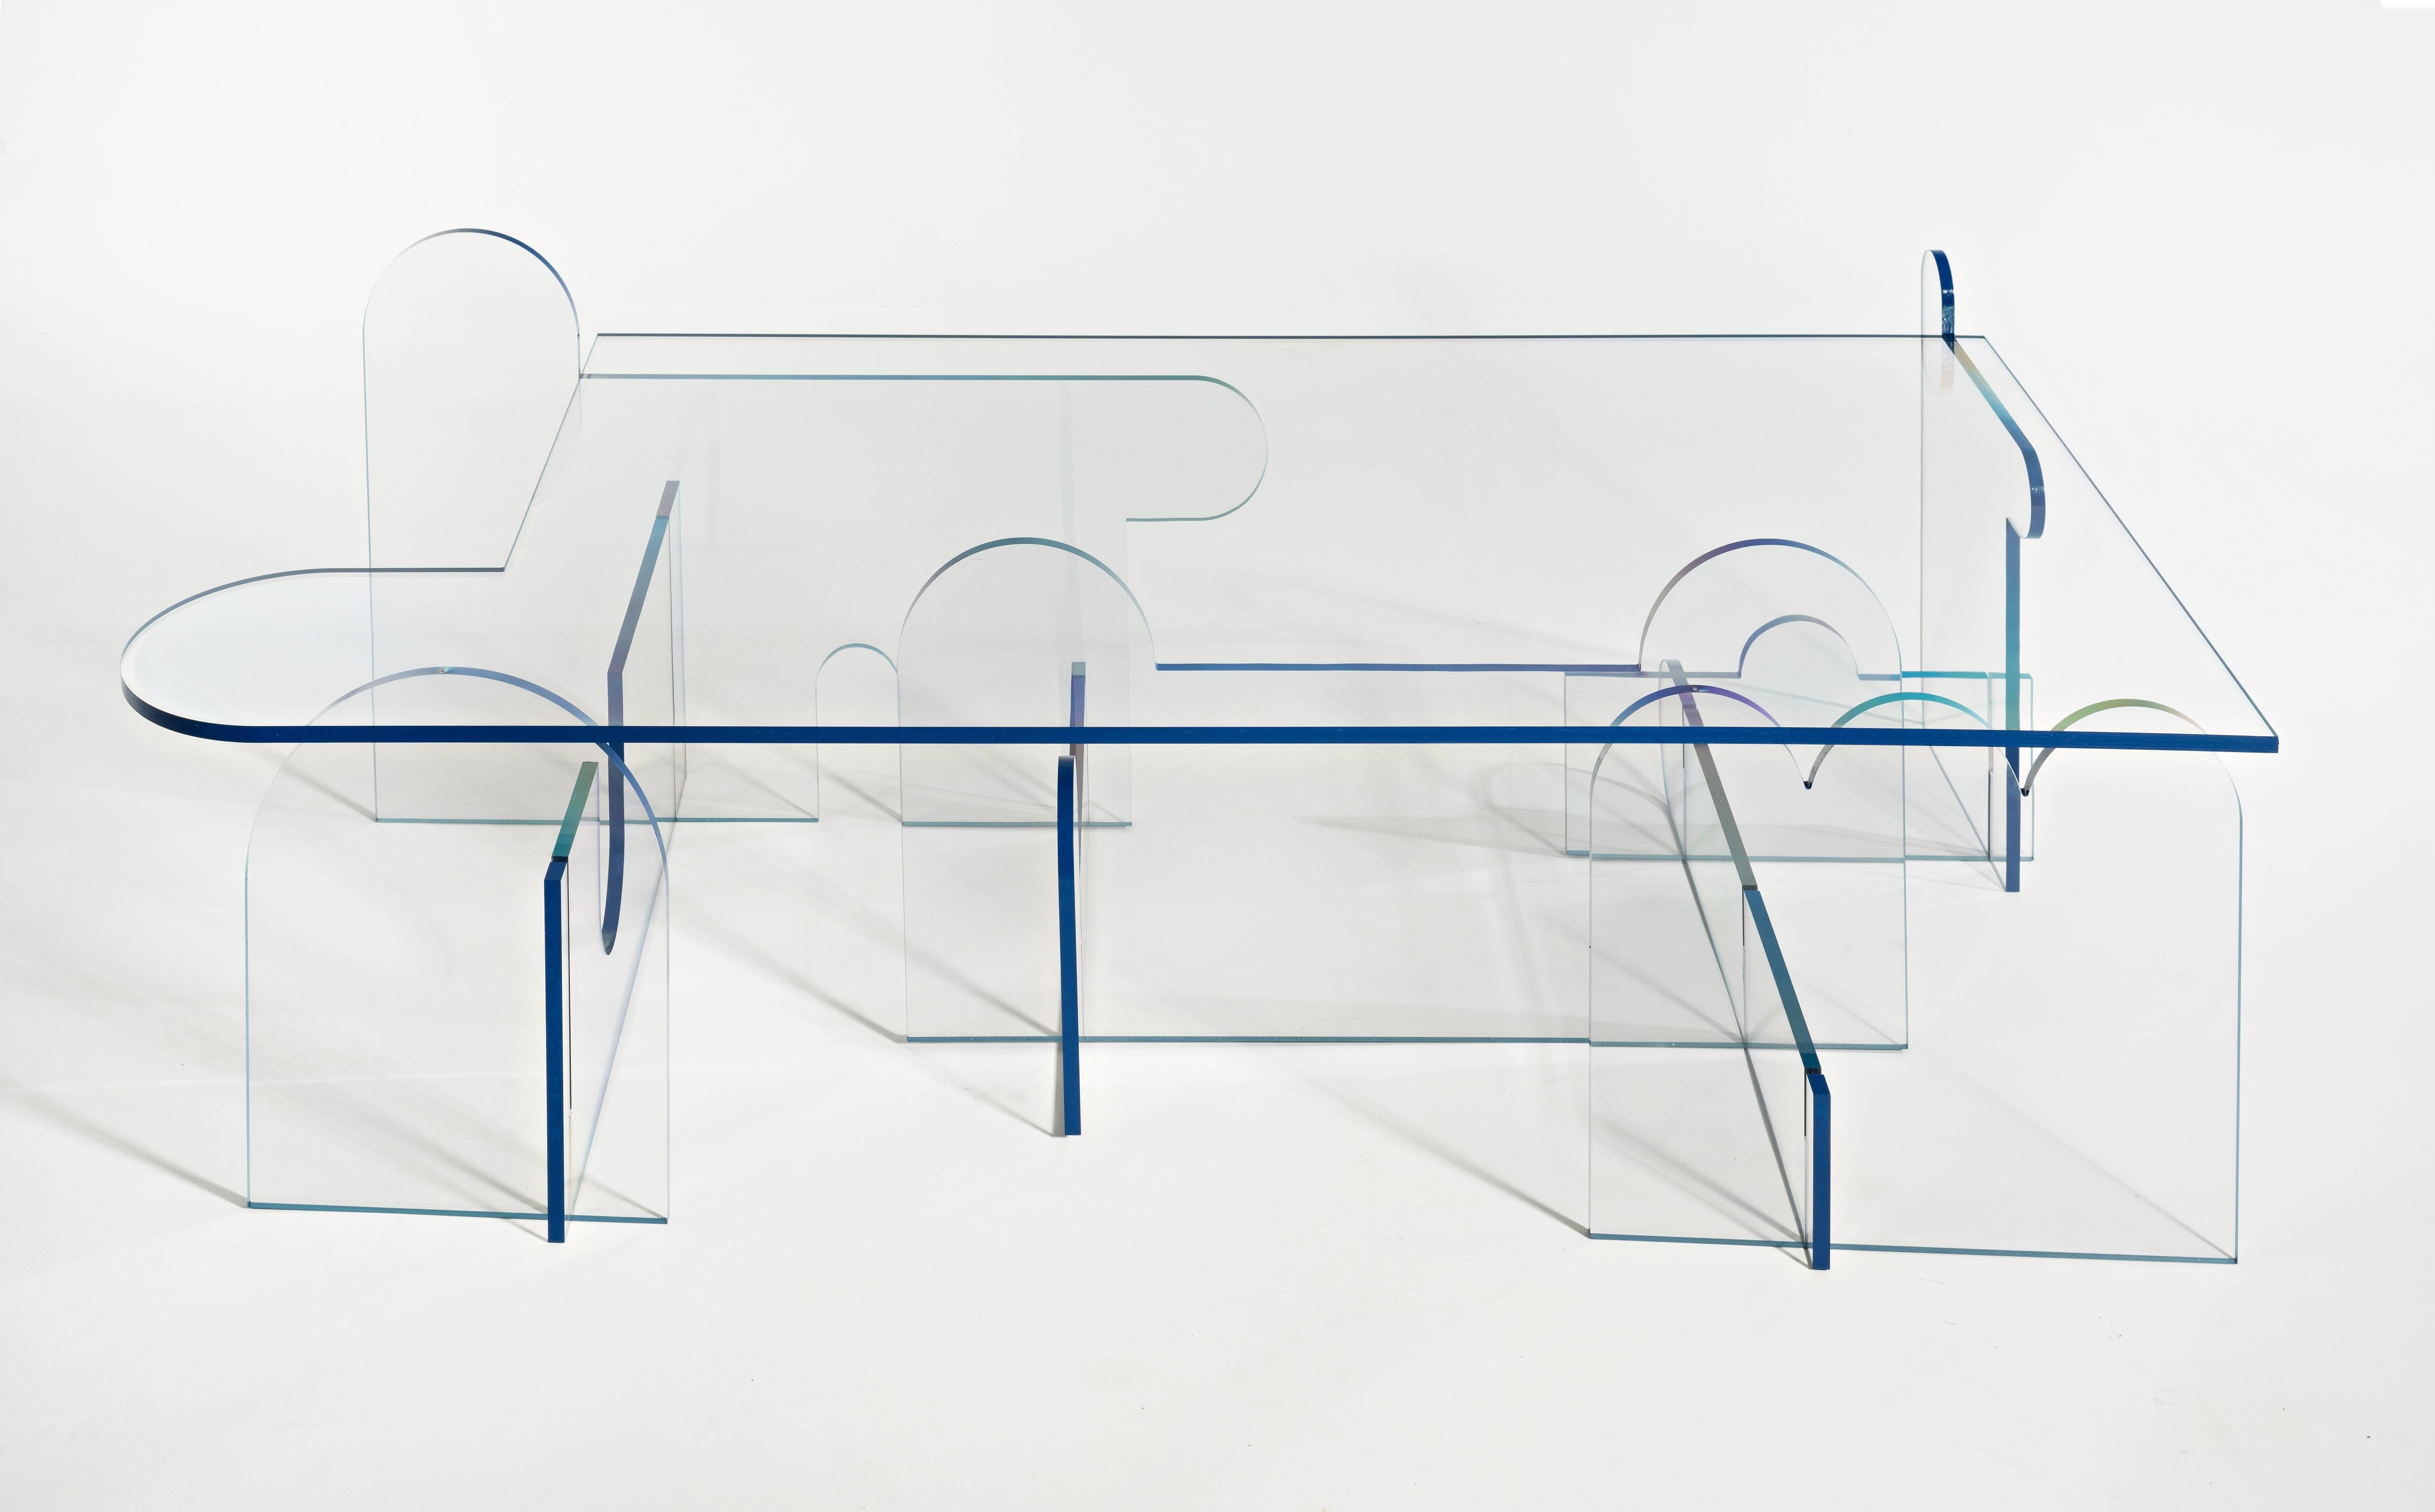 Inspired by line drawings, the Lexan series invokes the movement and playfulness of the artist's sculptural work.

Our intention is that the Lexan Series be inspired by the space in which is resides. To that end, each piece can be customized in